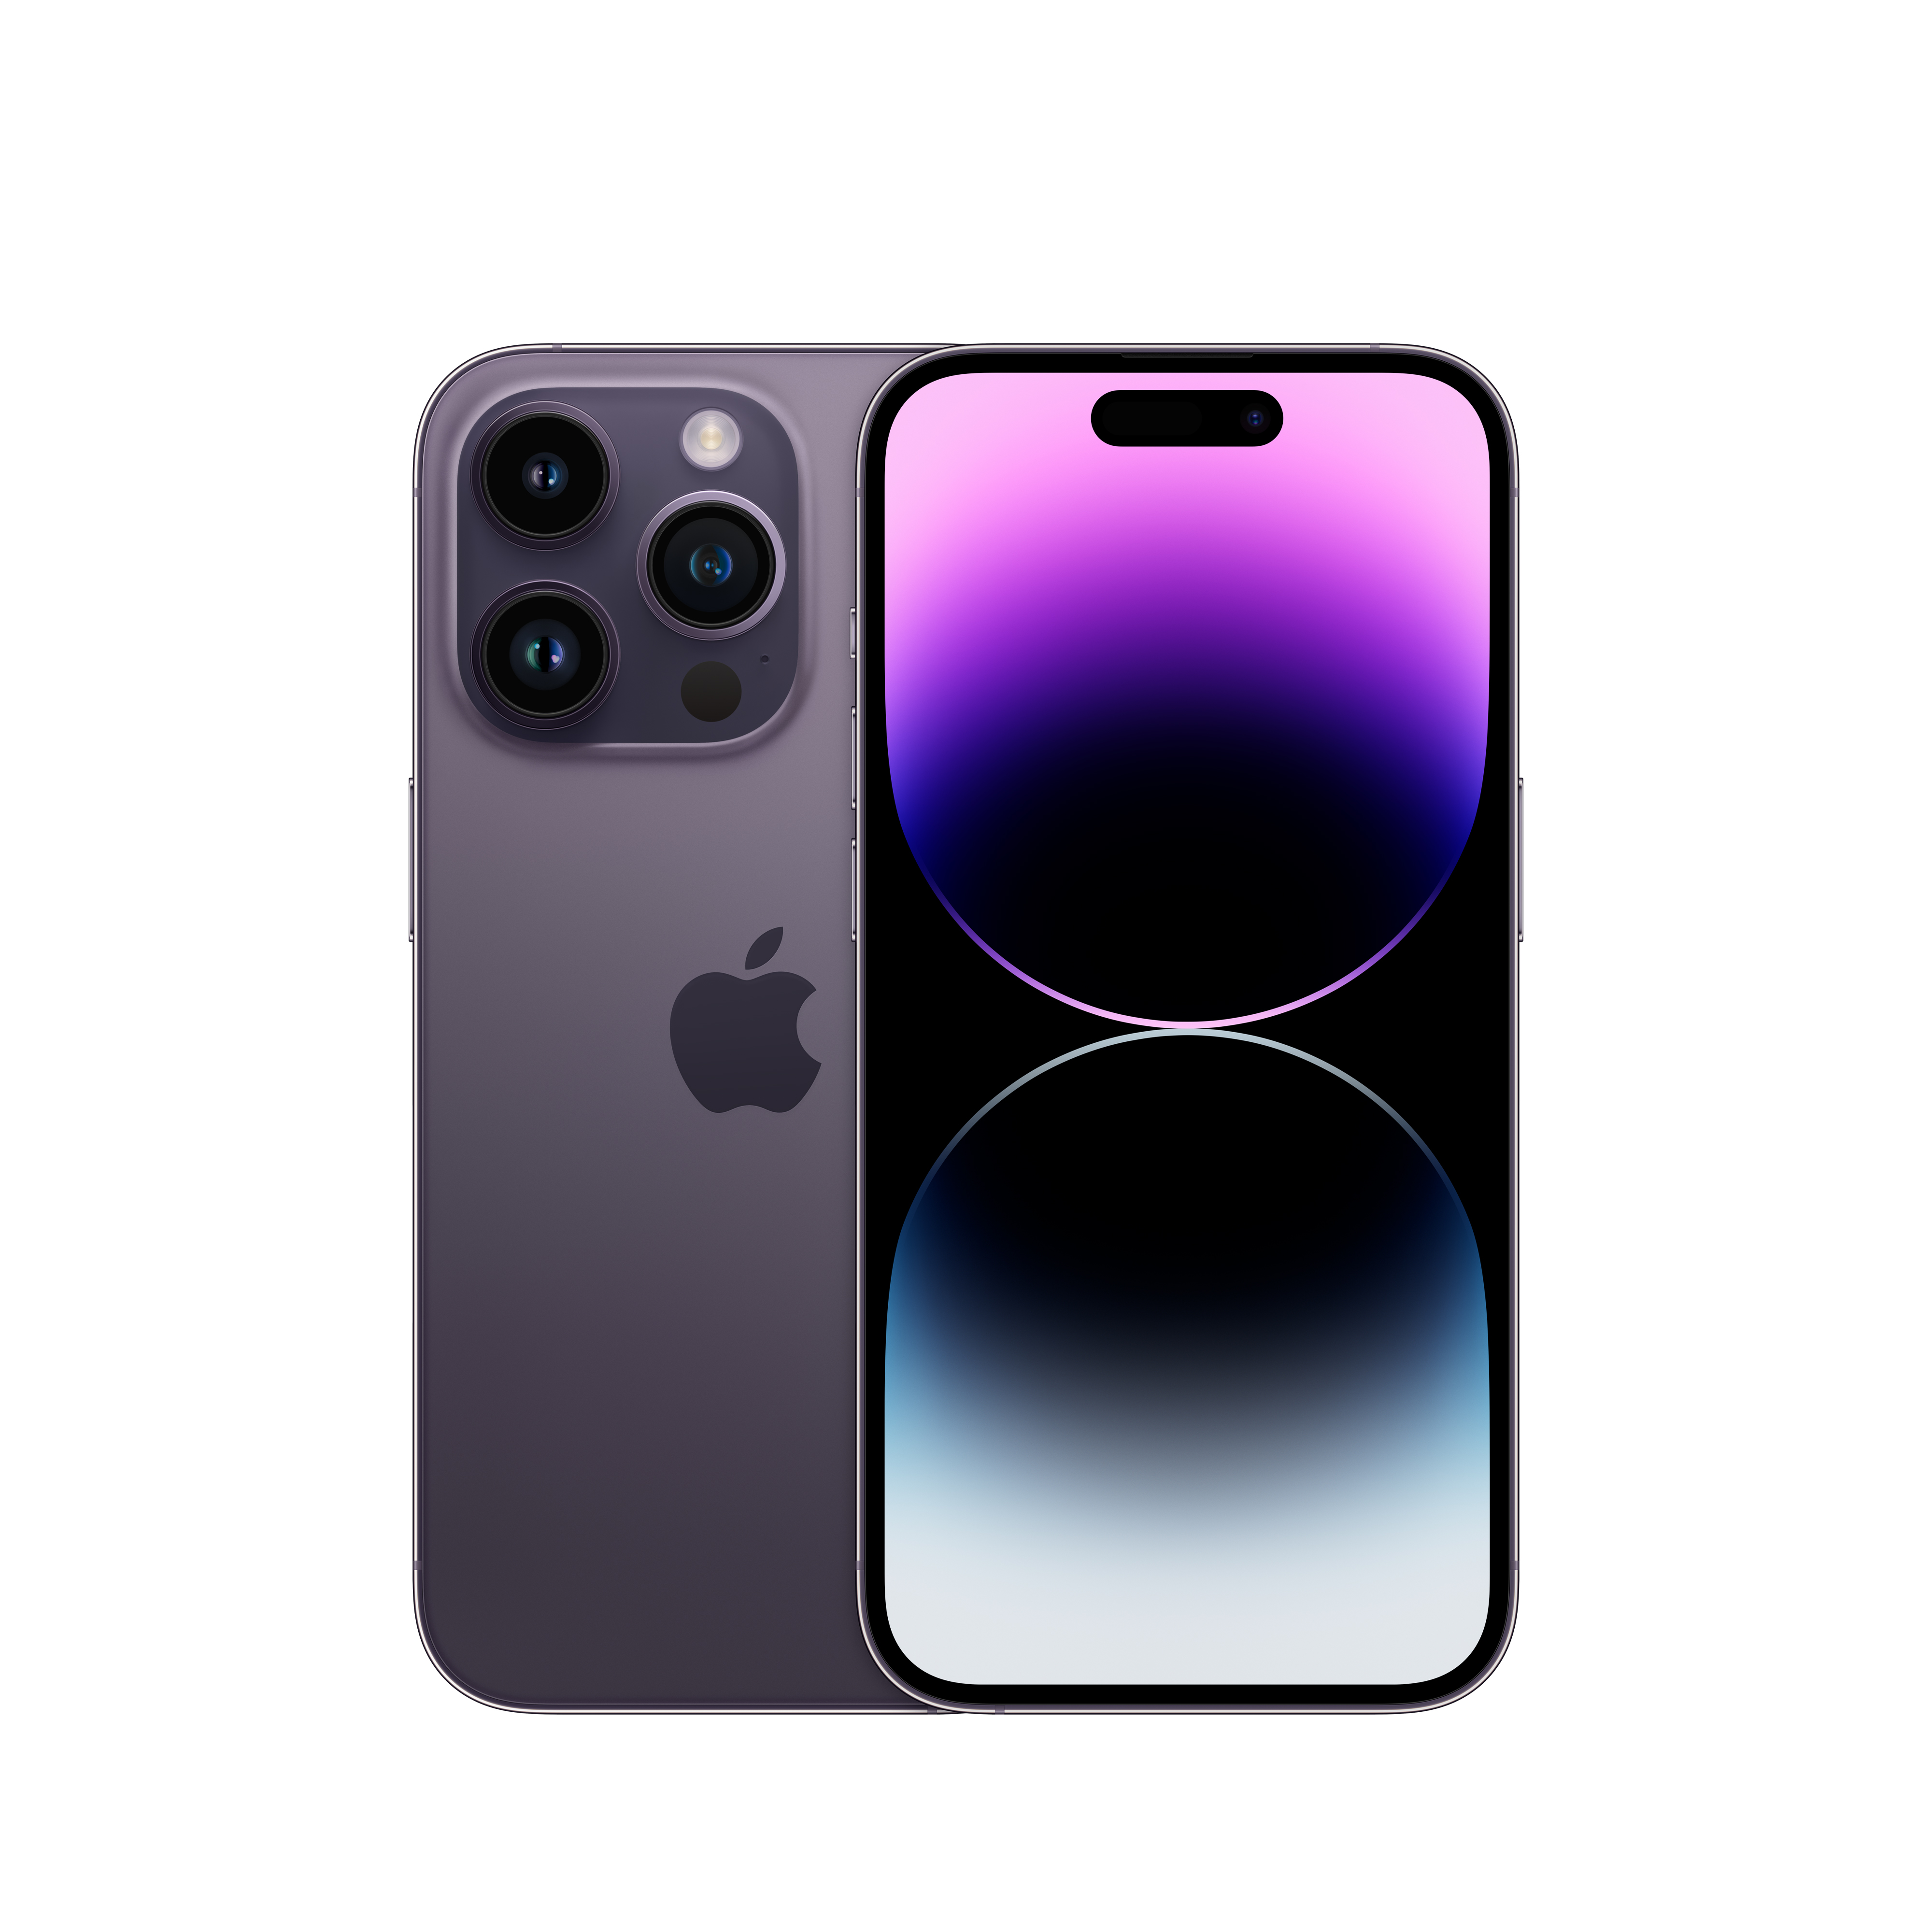 Apple iPhone 14 Pro (MQ1F3HN/A) Deep Purple with 256GB, iOS 16, A15 Bionic chip, 6core CPU with 2 performance, 6.1 inch OLED display